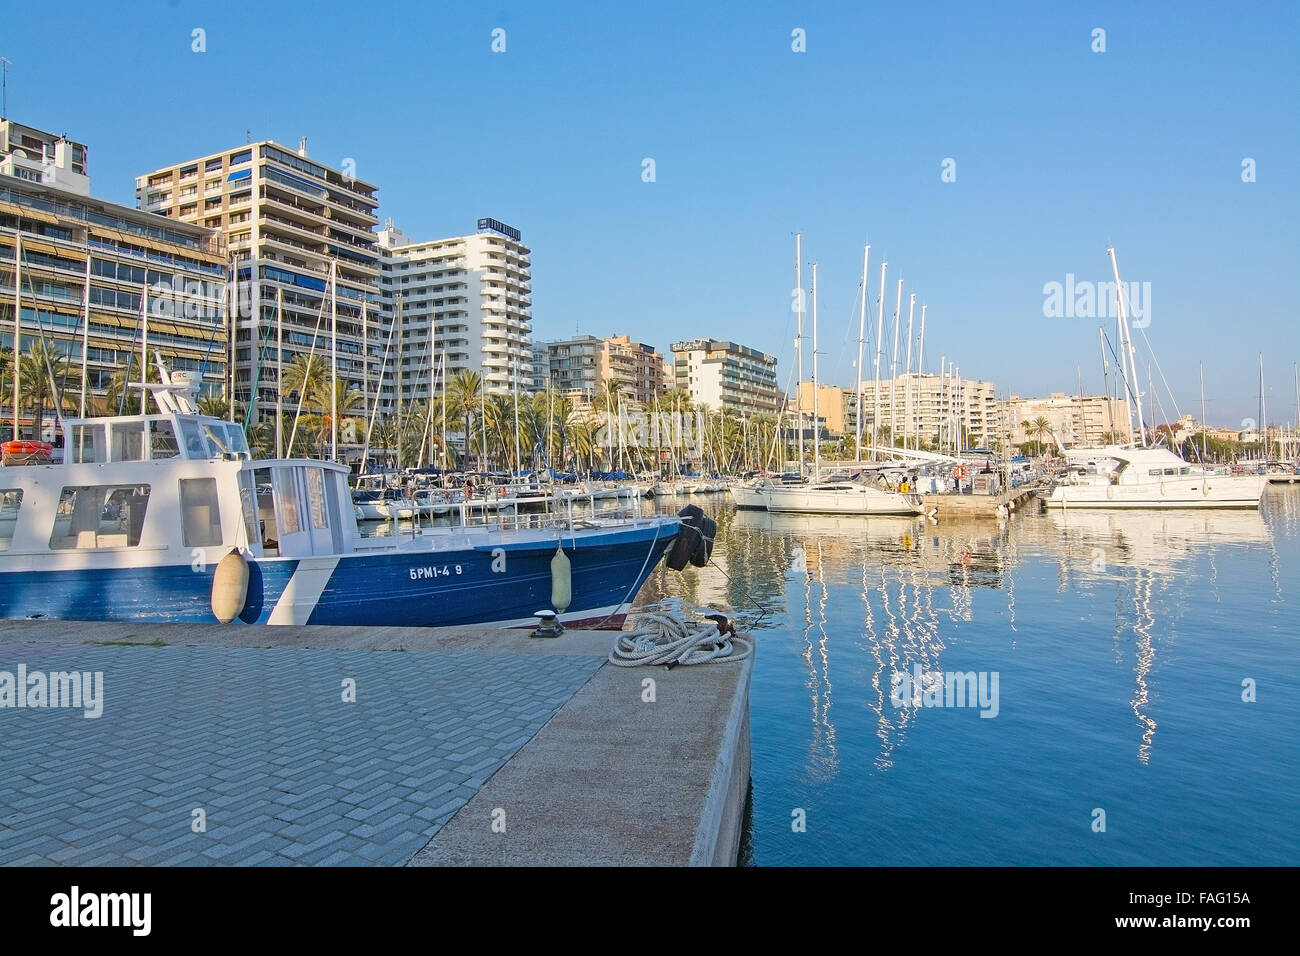 Boats in the Palma marina and hotel Tryp Bellver on a sunny day on December 20, 2015 in Palma de Mallorca, Spain Stock Photo